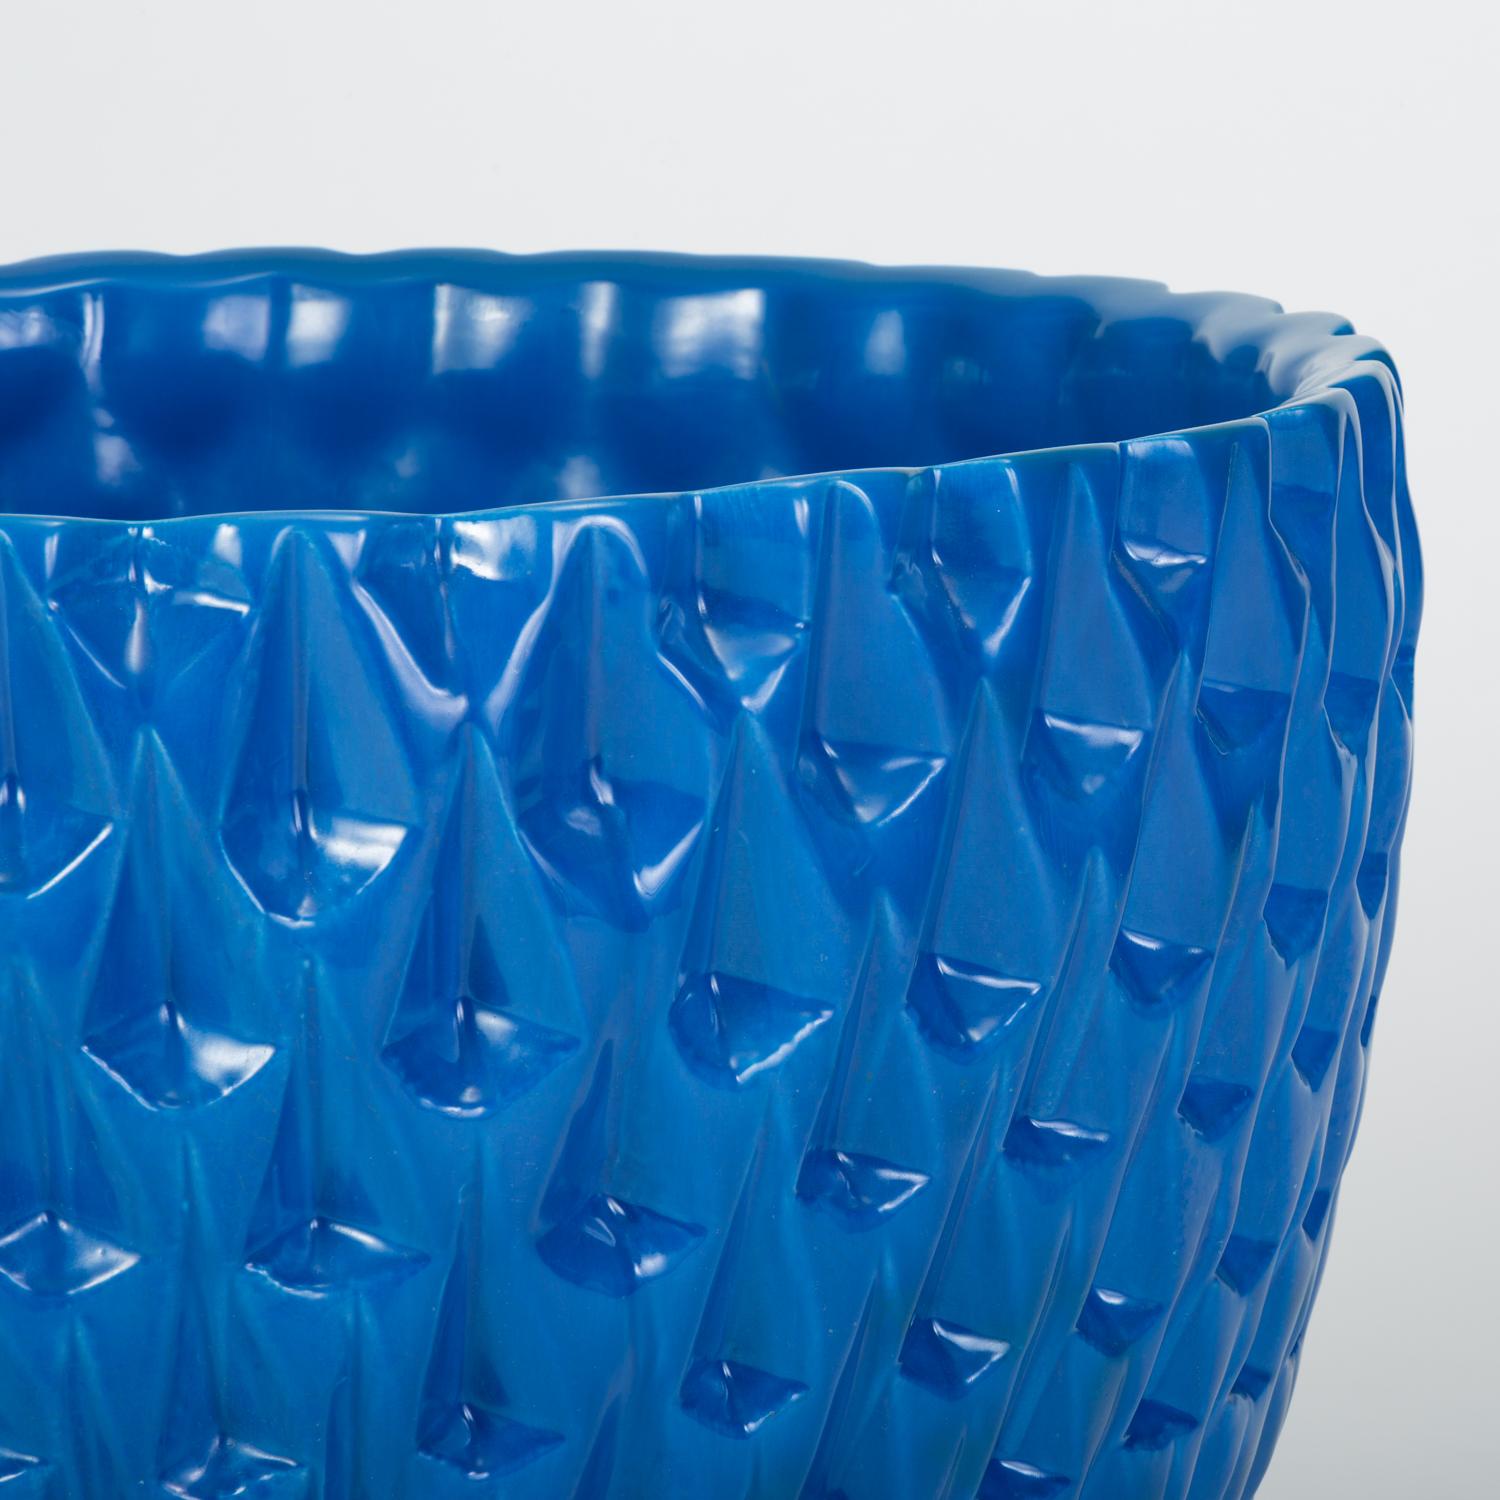 Stoneware Phoenix-1 Planter in Blue Glaze by David Cressey for Architectural Pottery